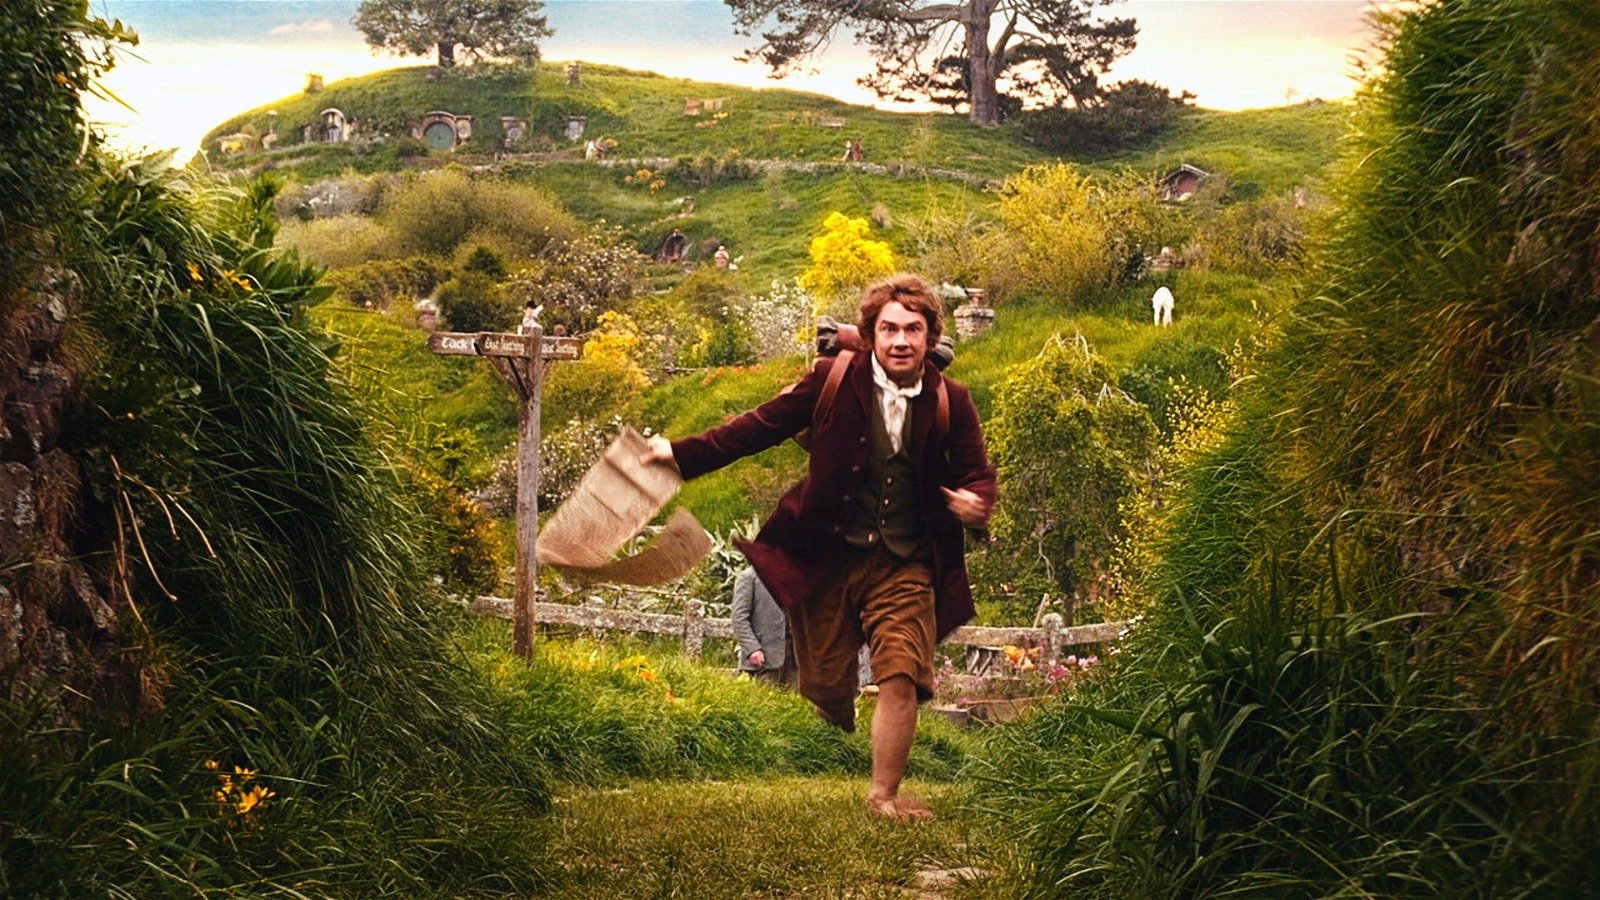 Blog ✦ The Hobbit Movies in Order